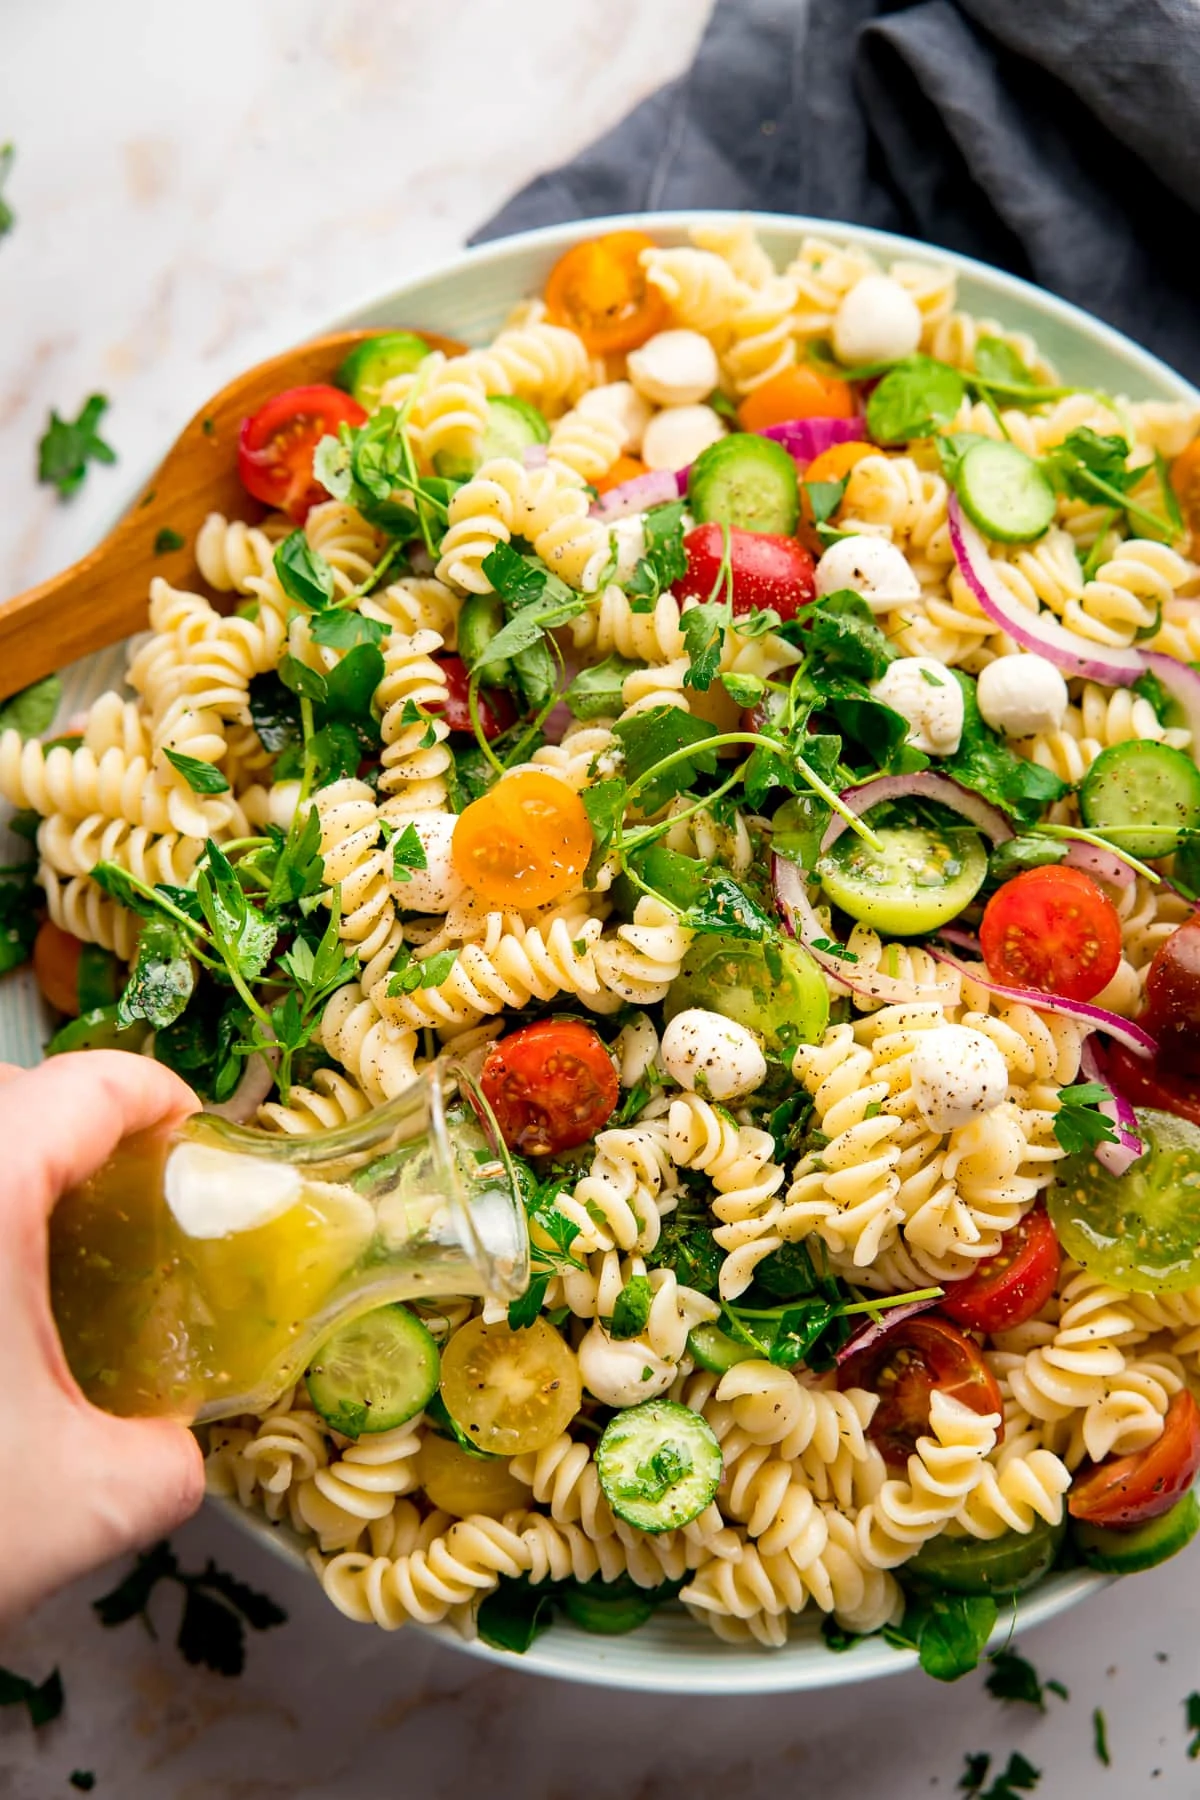 Italian dressing being poured onto a bowl of pasta salad